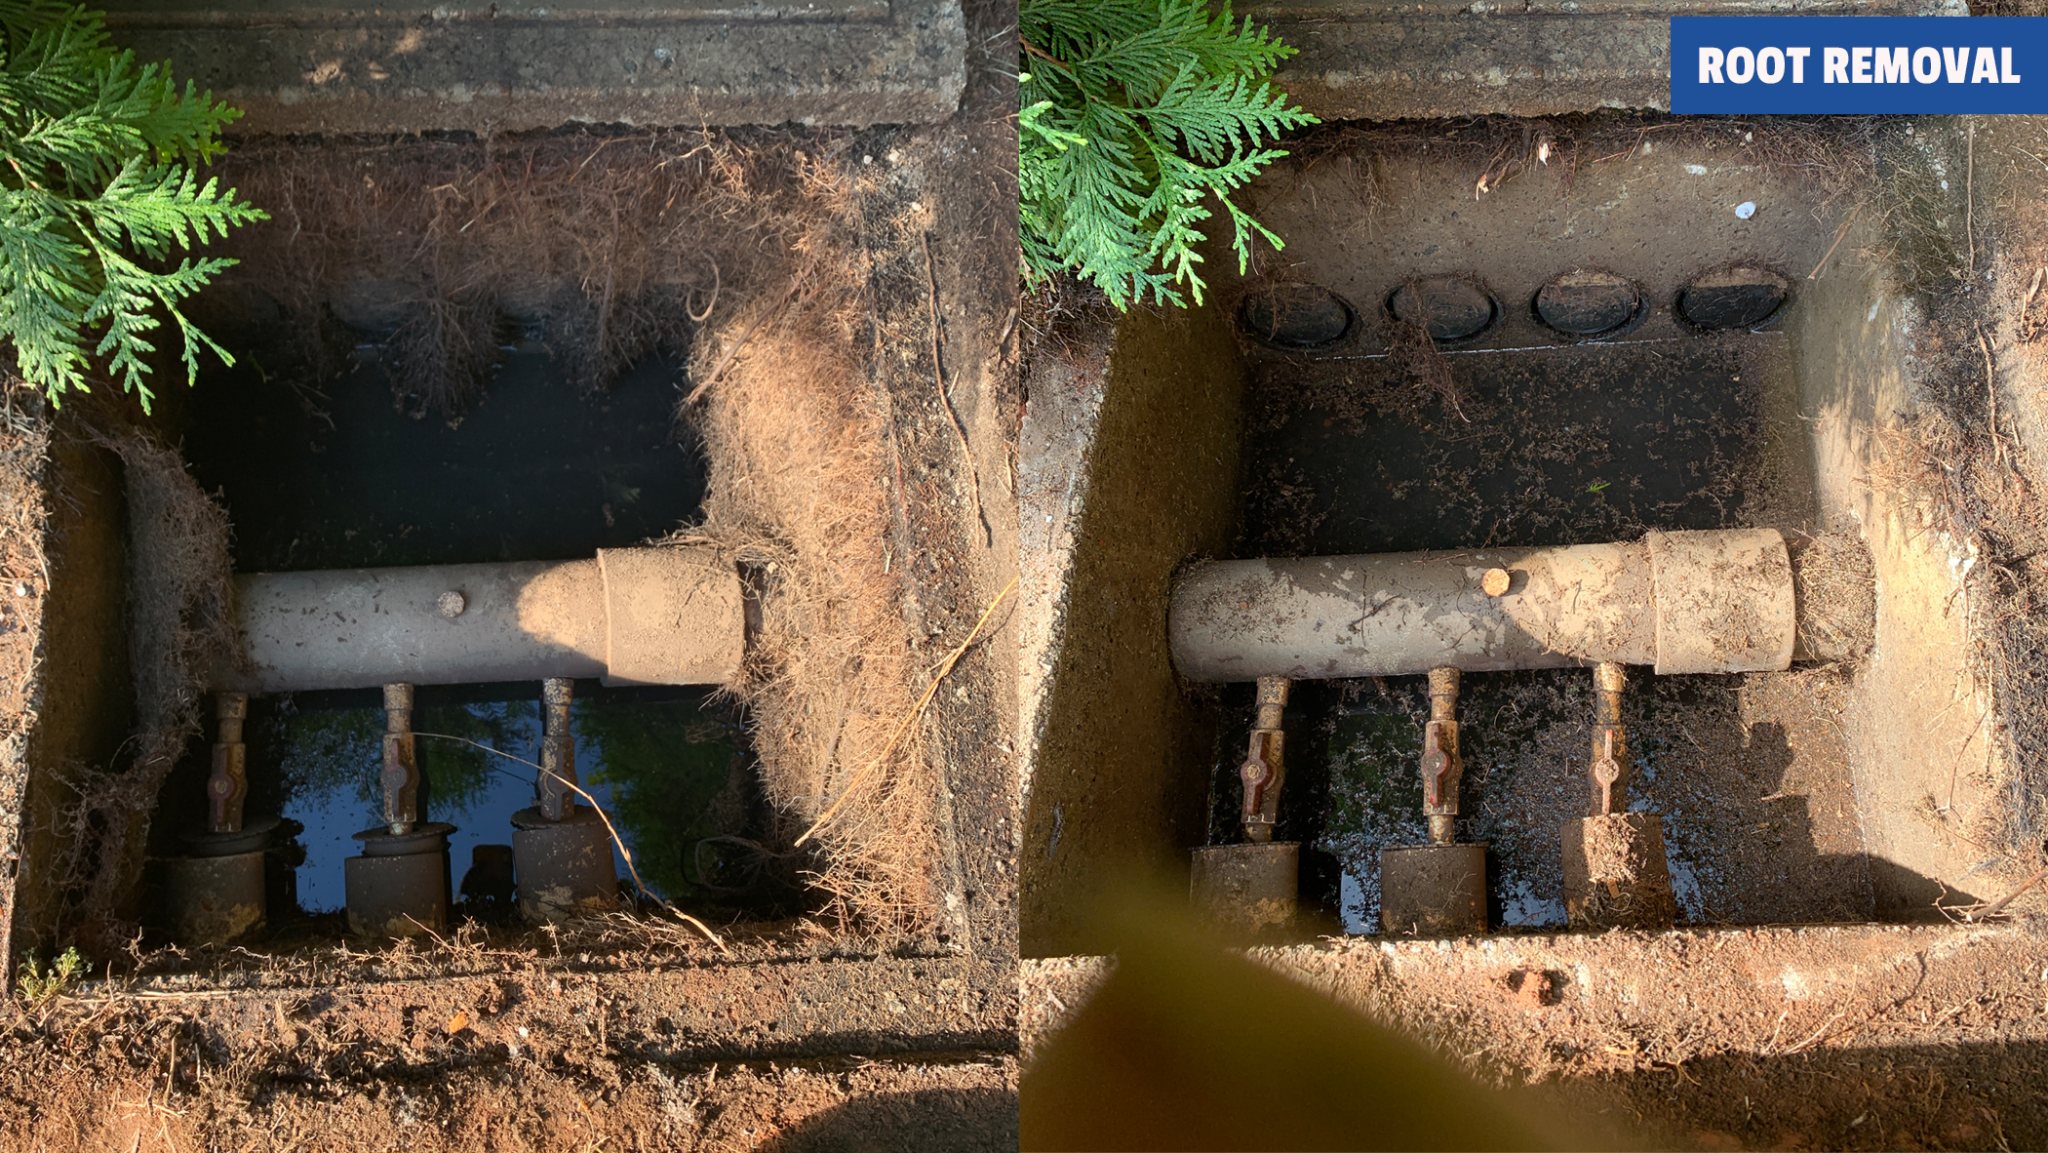 TW Ammons Septic - Removing roots from a pressure manifold.